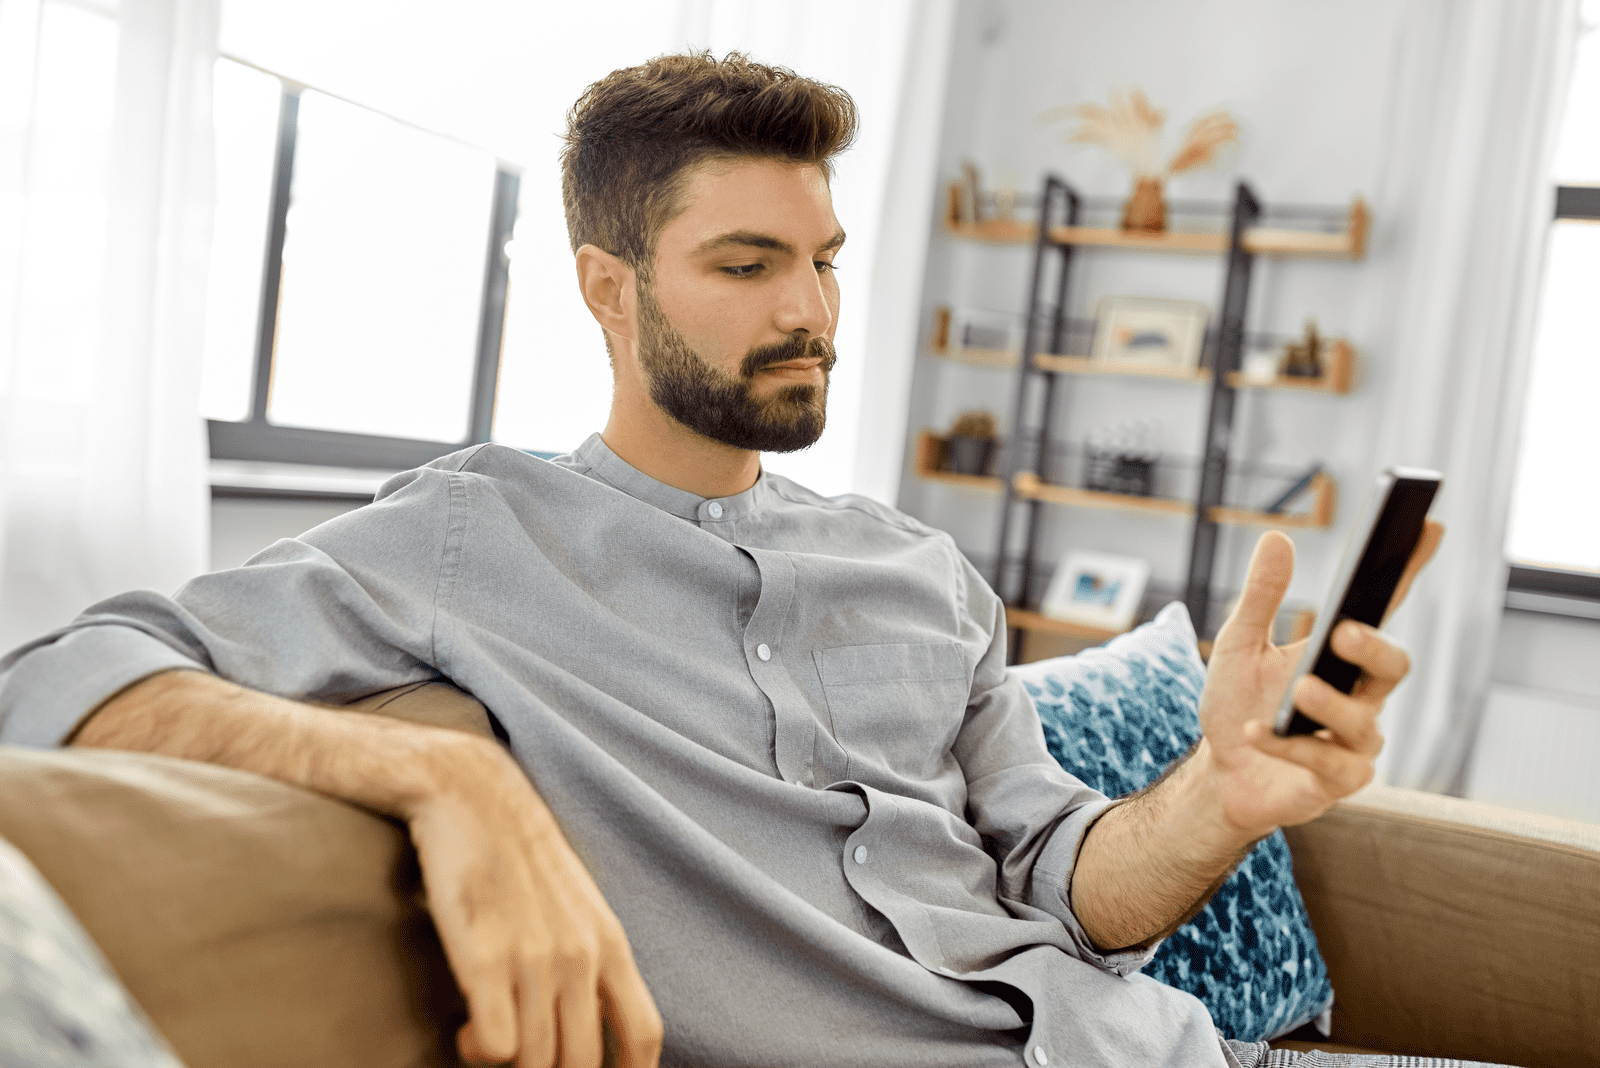 the man sits on the couch and holds the phone in his hand